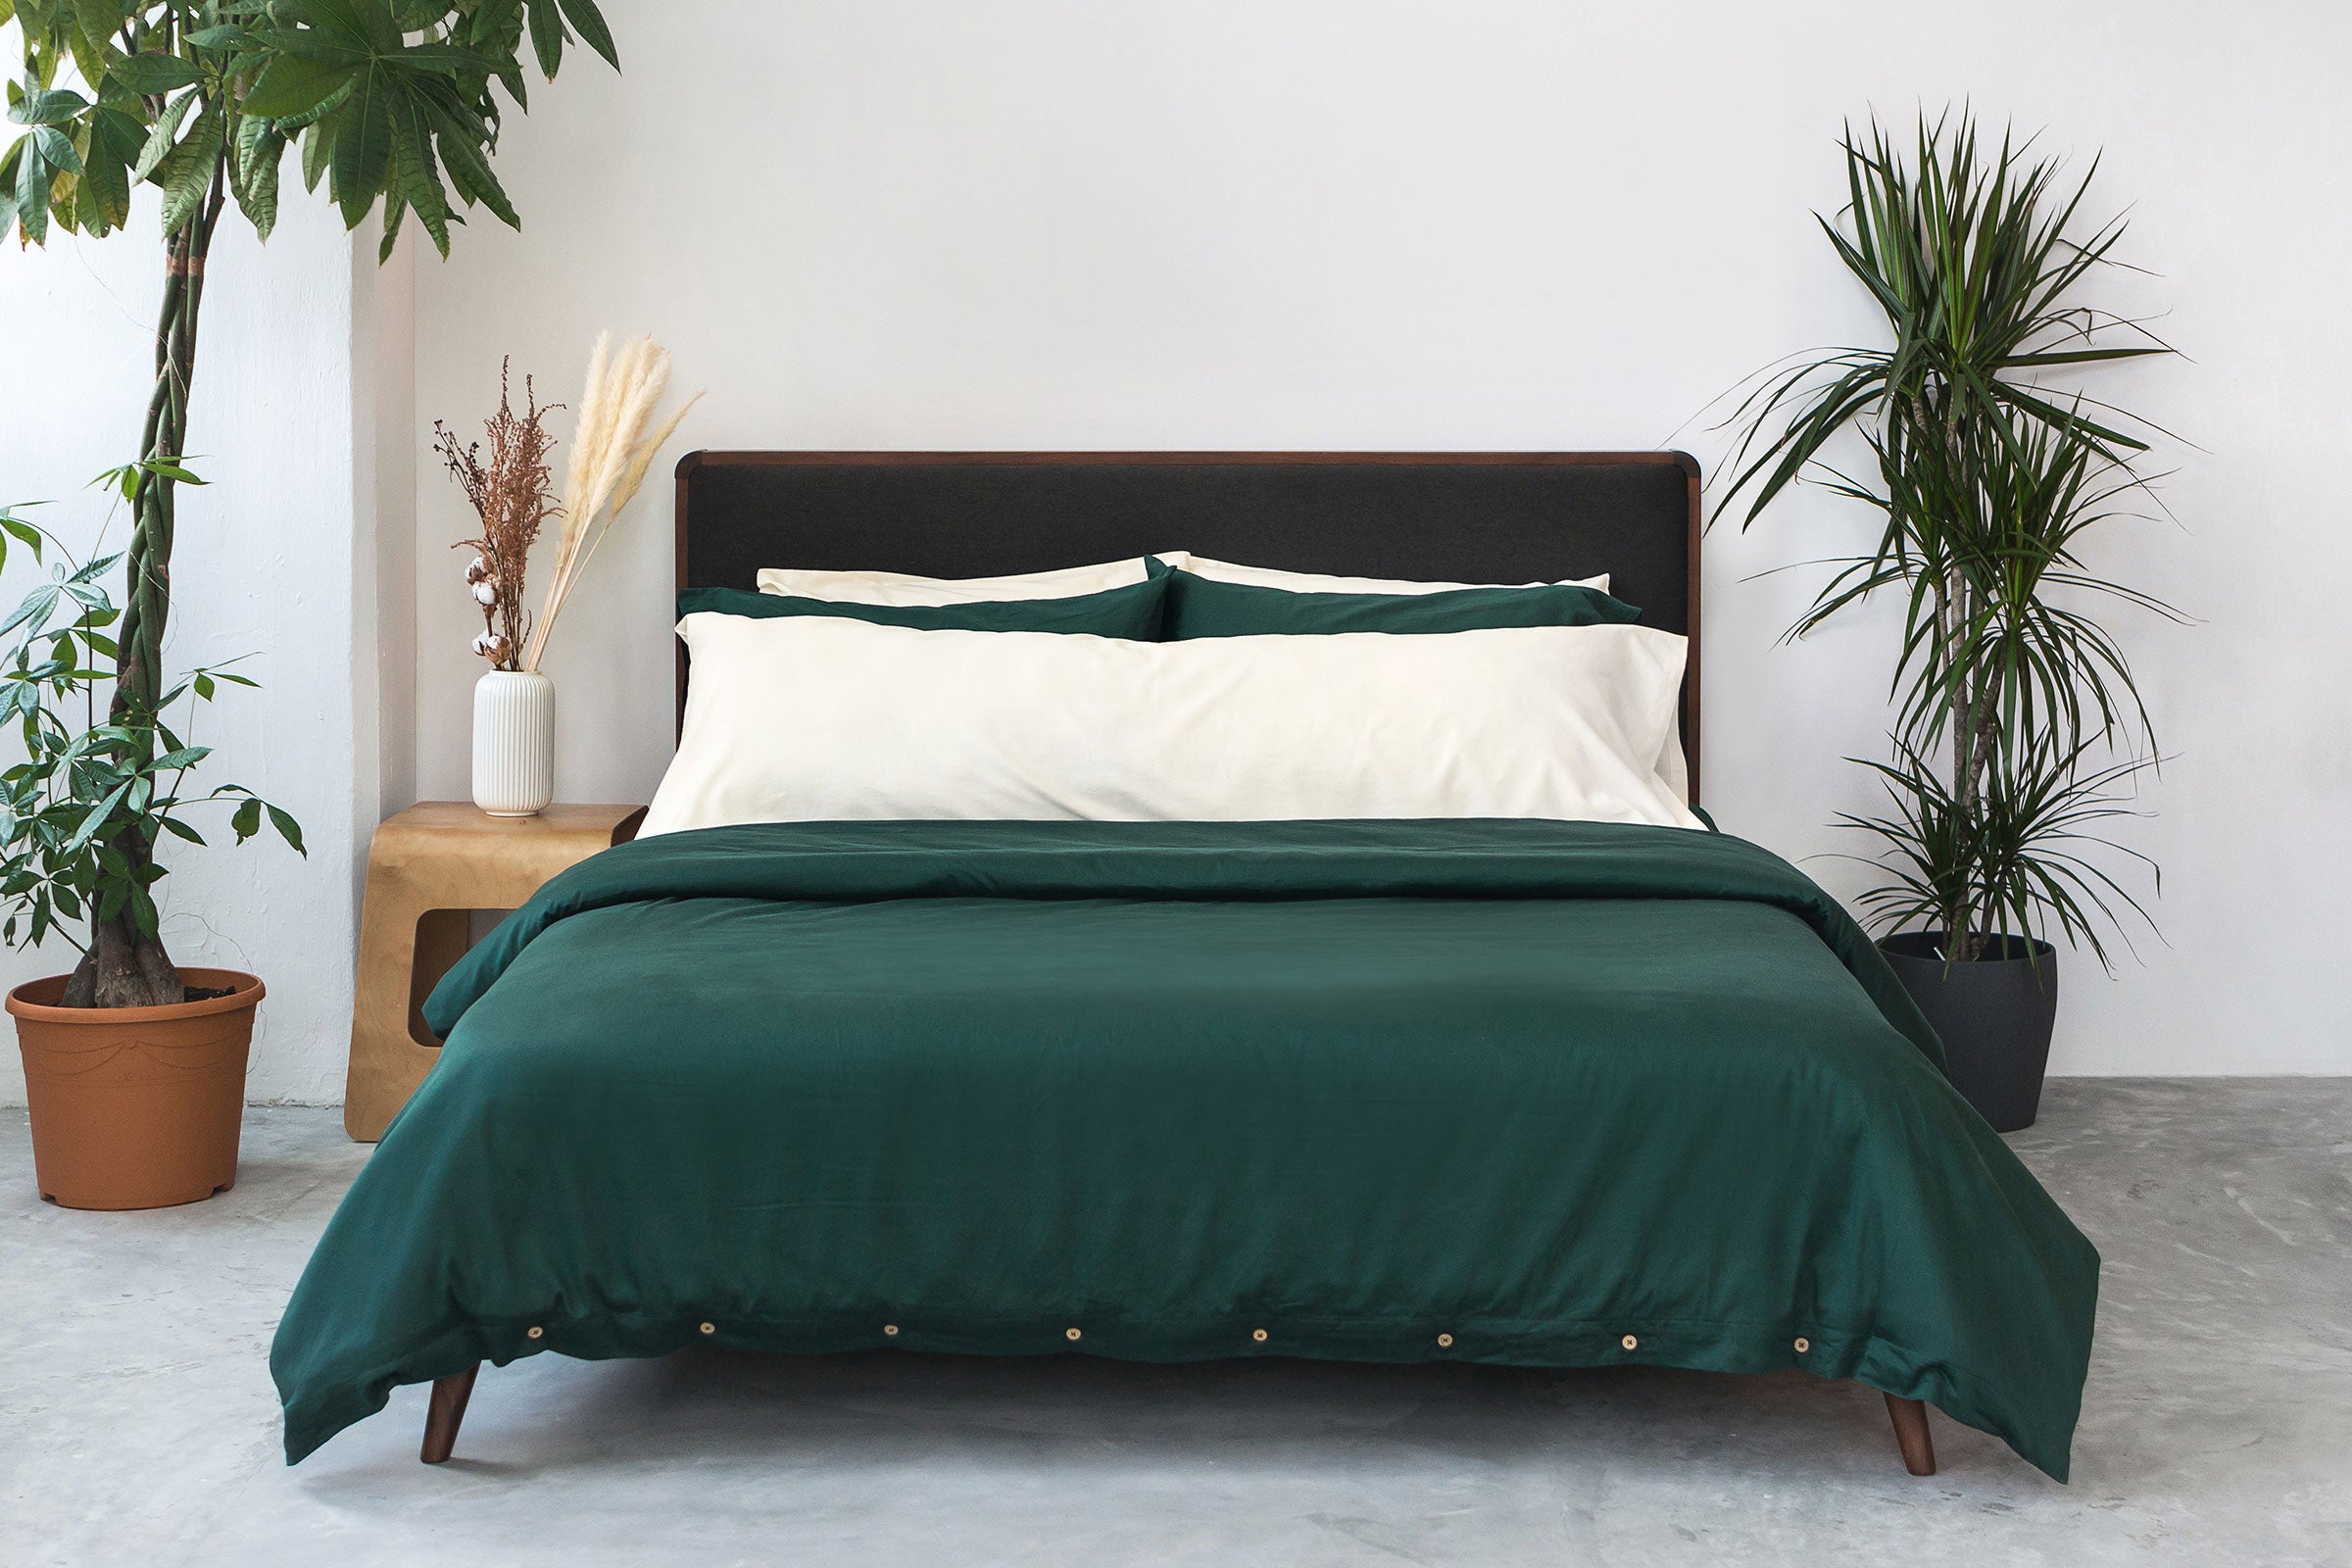 classic-forest-duvet-cover-fitted-sheet-pillowcase-pair-natural-pillowcase-pair-body-pillow-by-sojao.jpg